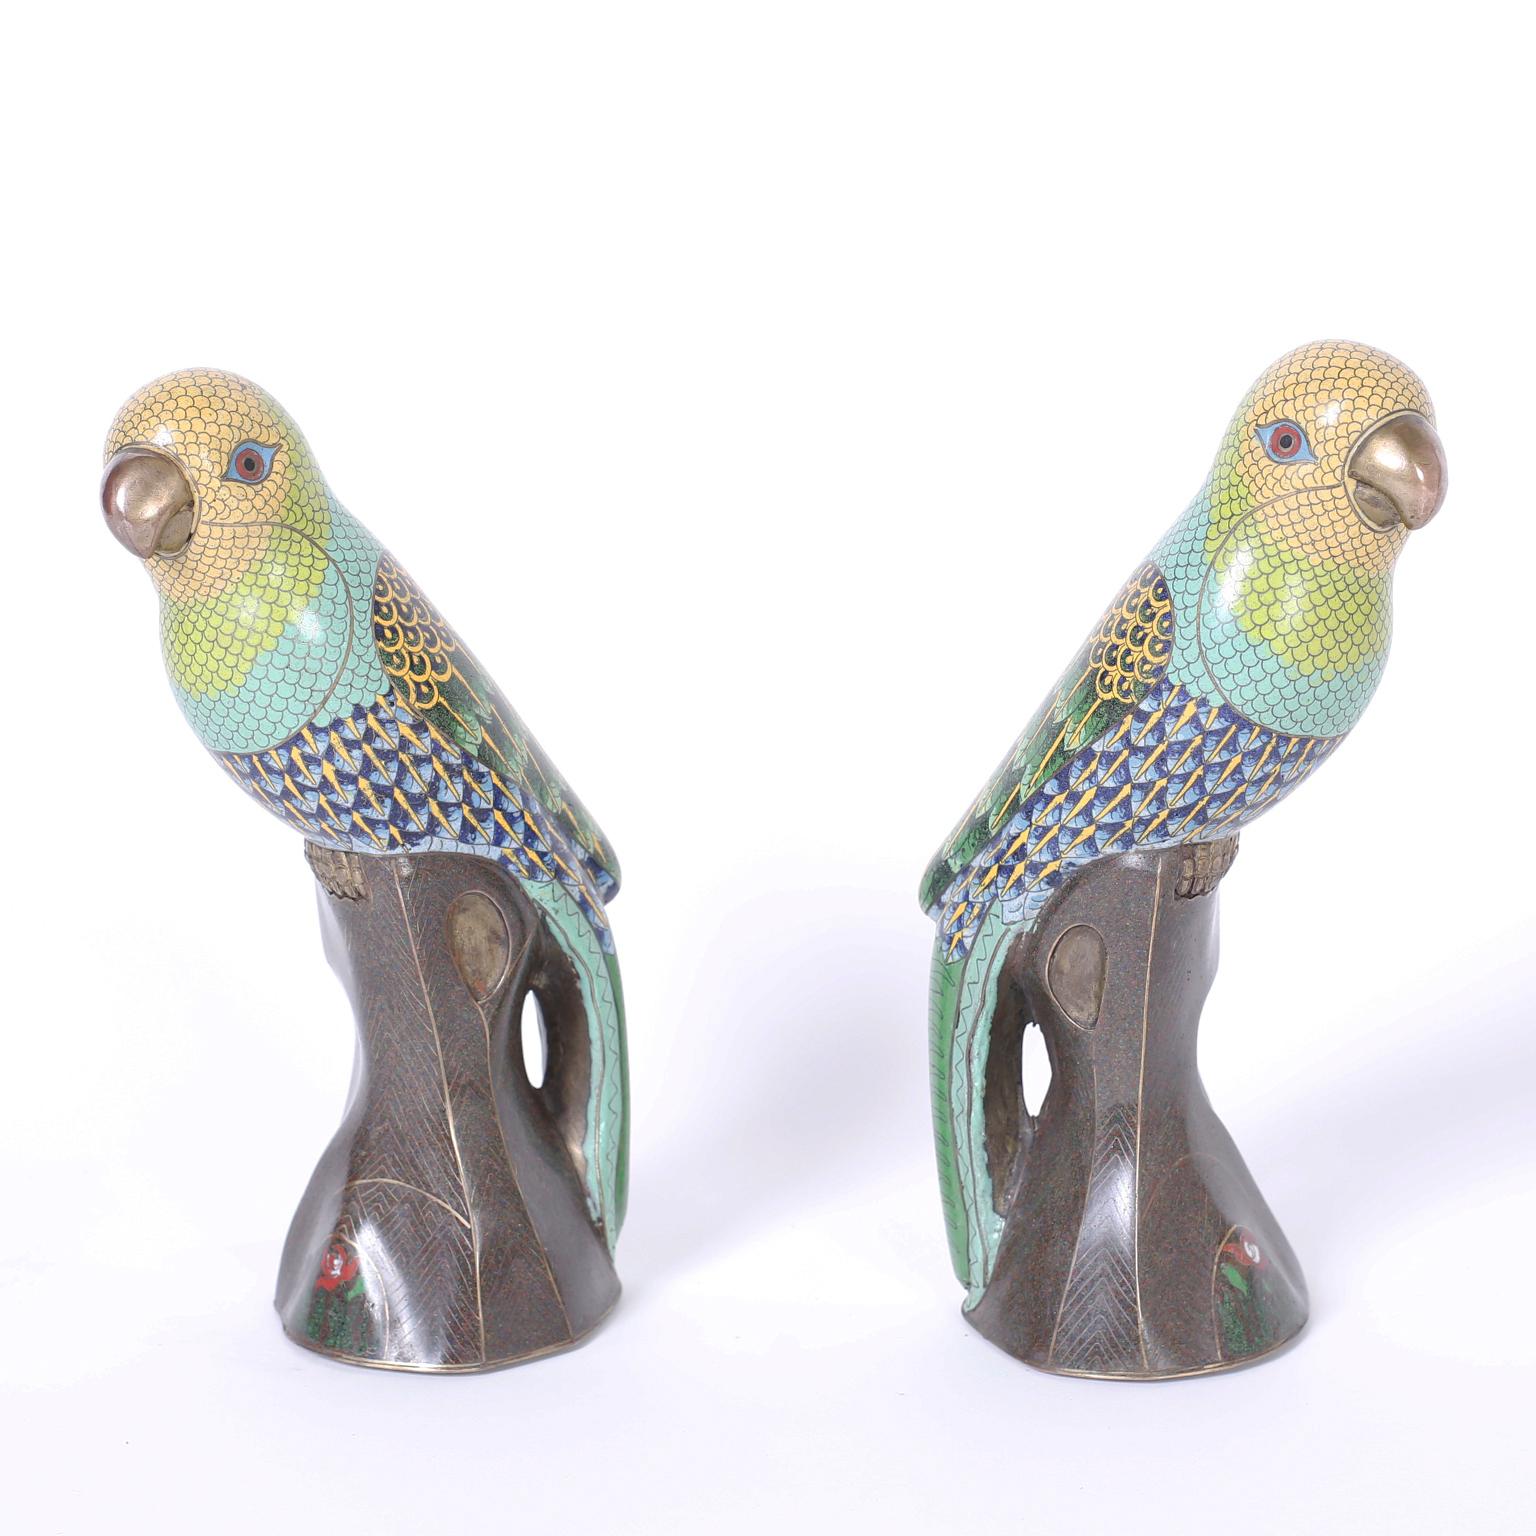 Amusing pair of Chinese cloisonné parakeets or budgies with colorful plumage and humorous expressions.